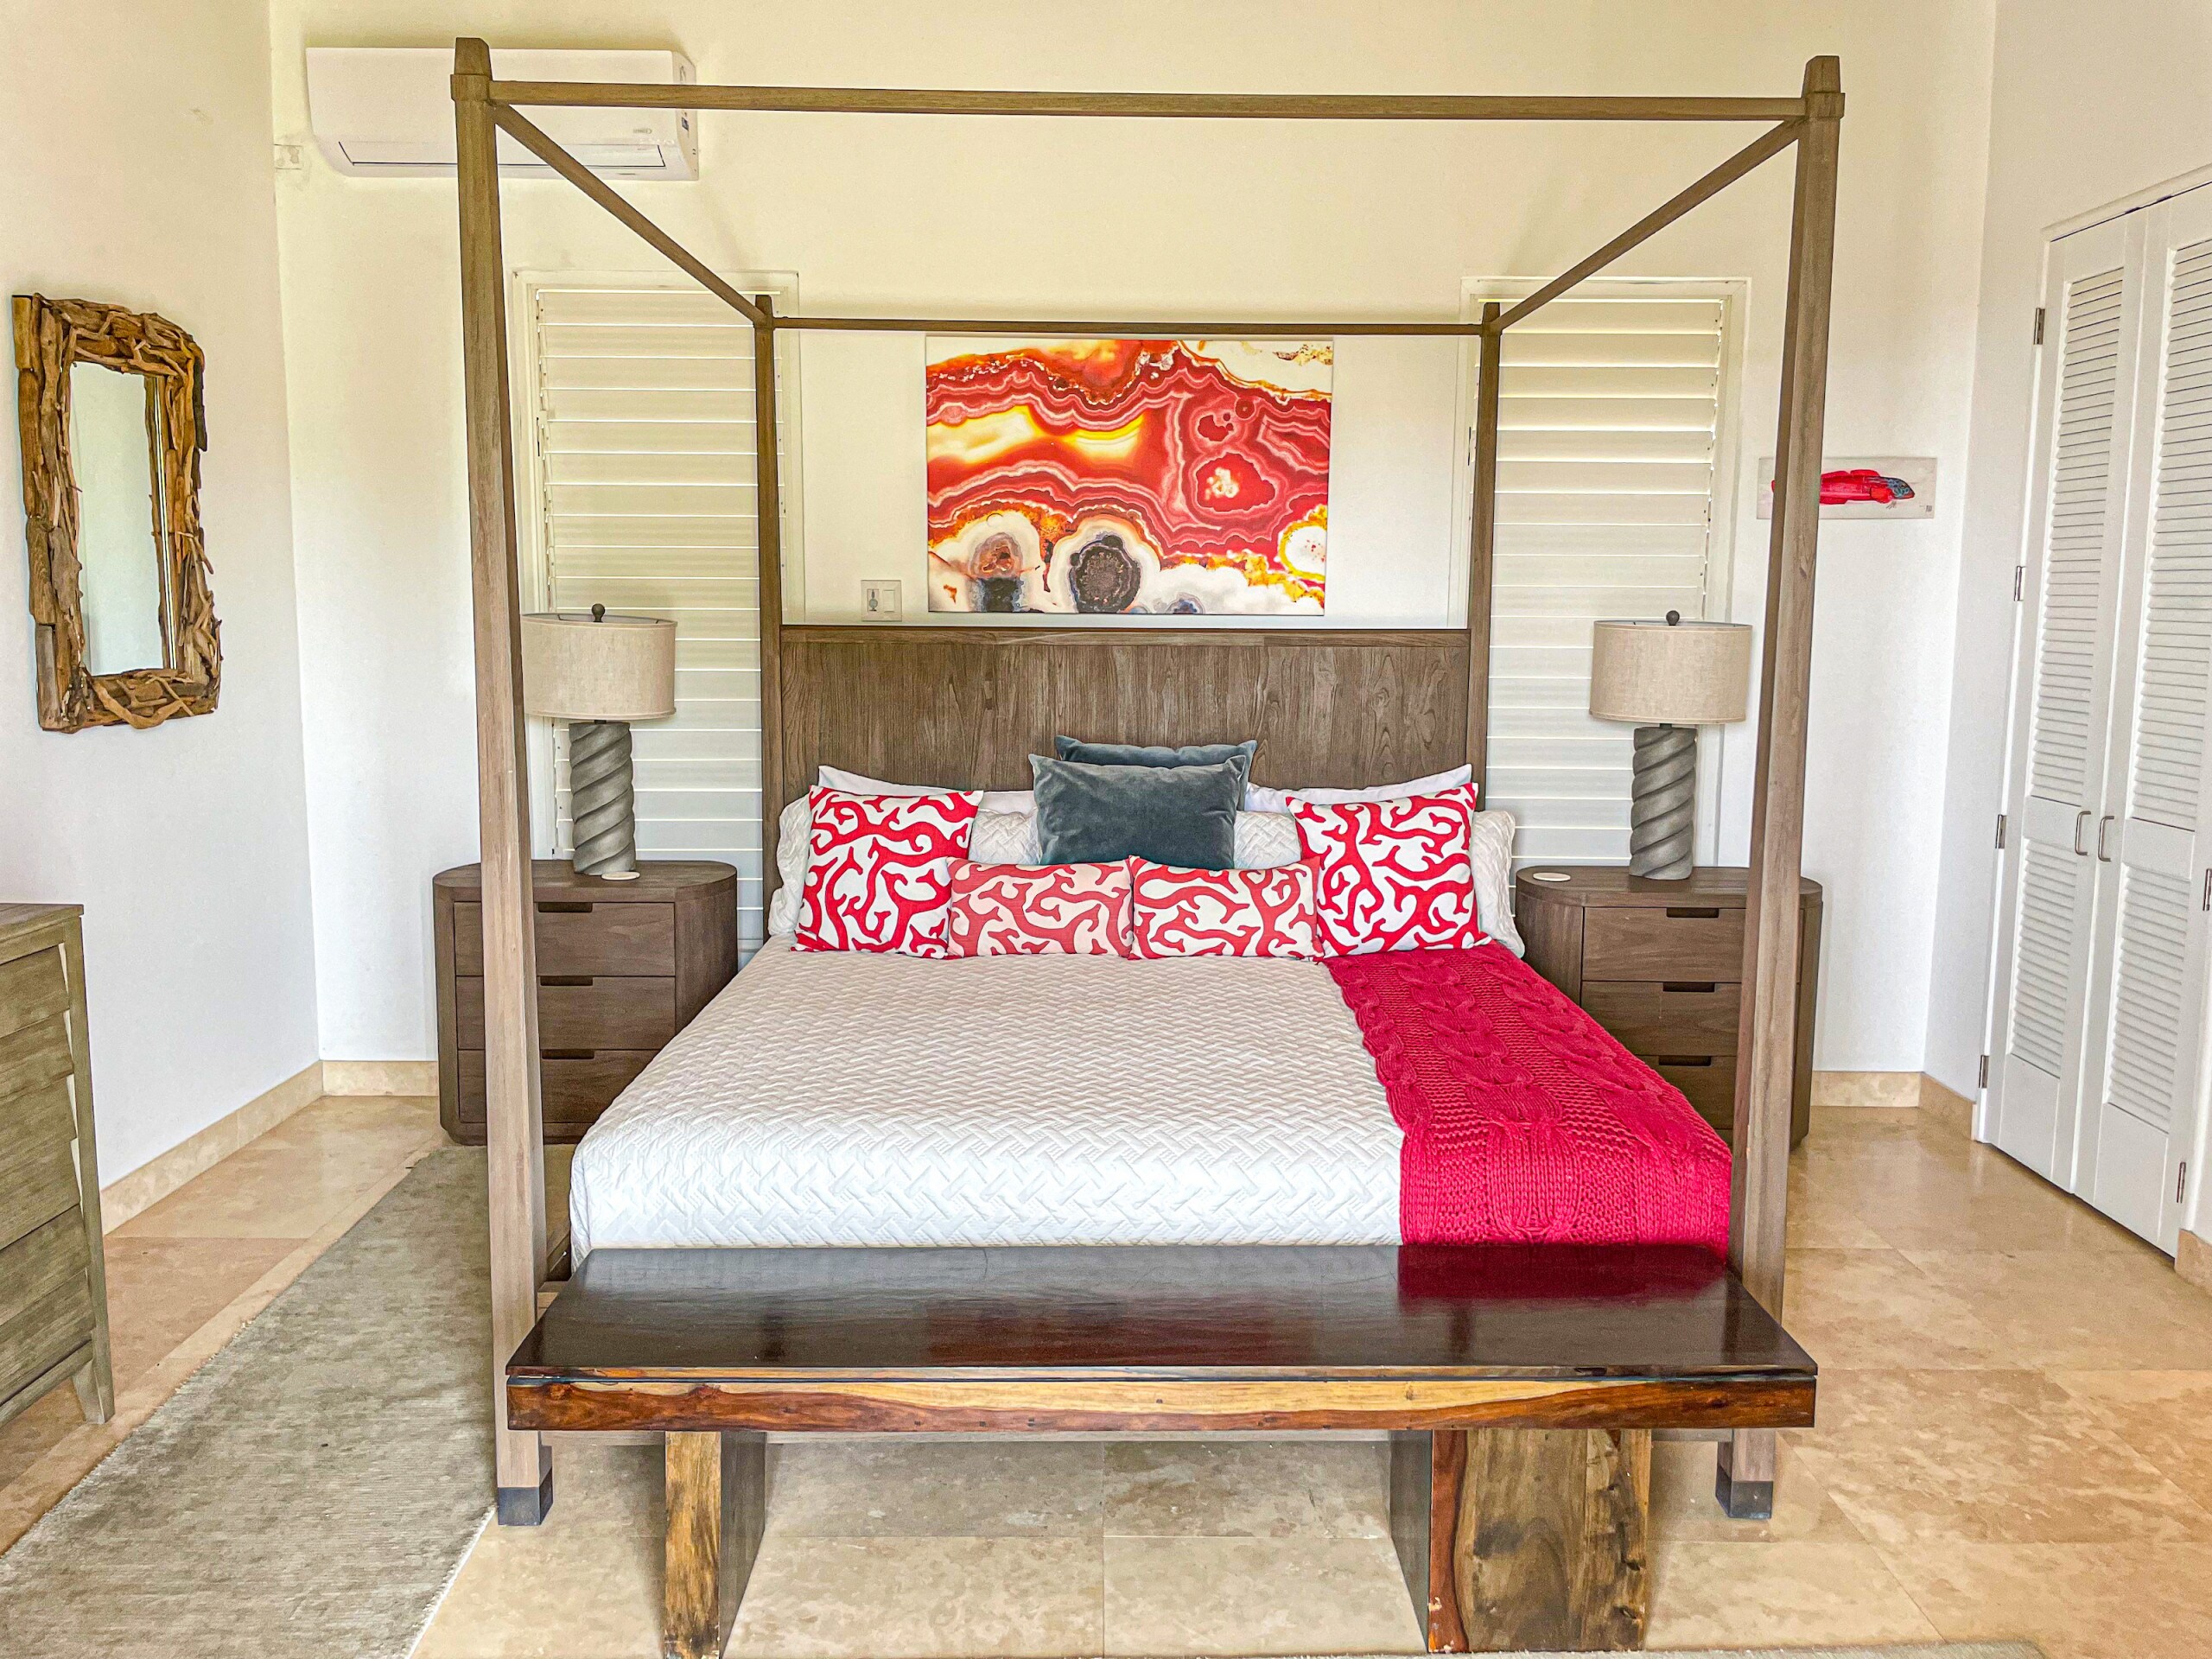 Charming three-bedroom villa with stunning natural, vaulted ceilings, ceiling fans, air-conditioning, duvets, and luxurious en-suite bathrooms with chic limestone and full body showers at Sugar Ridge Villa Rentals